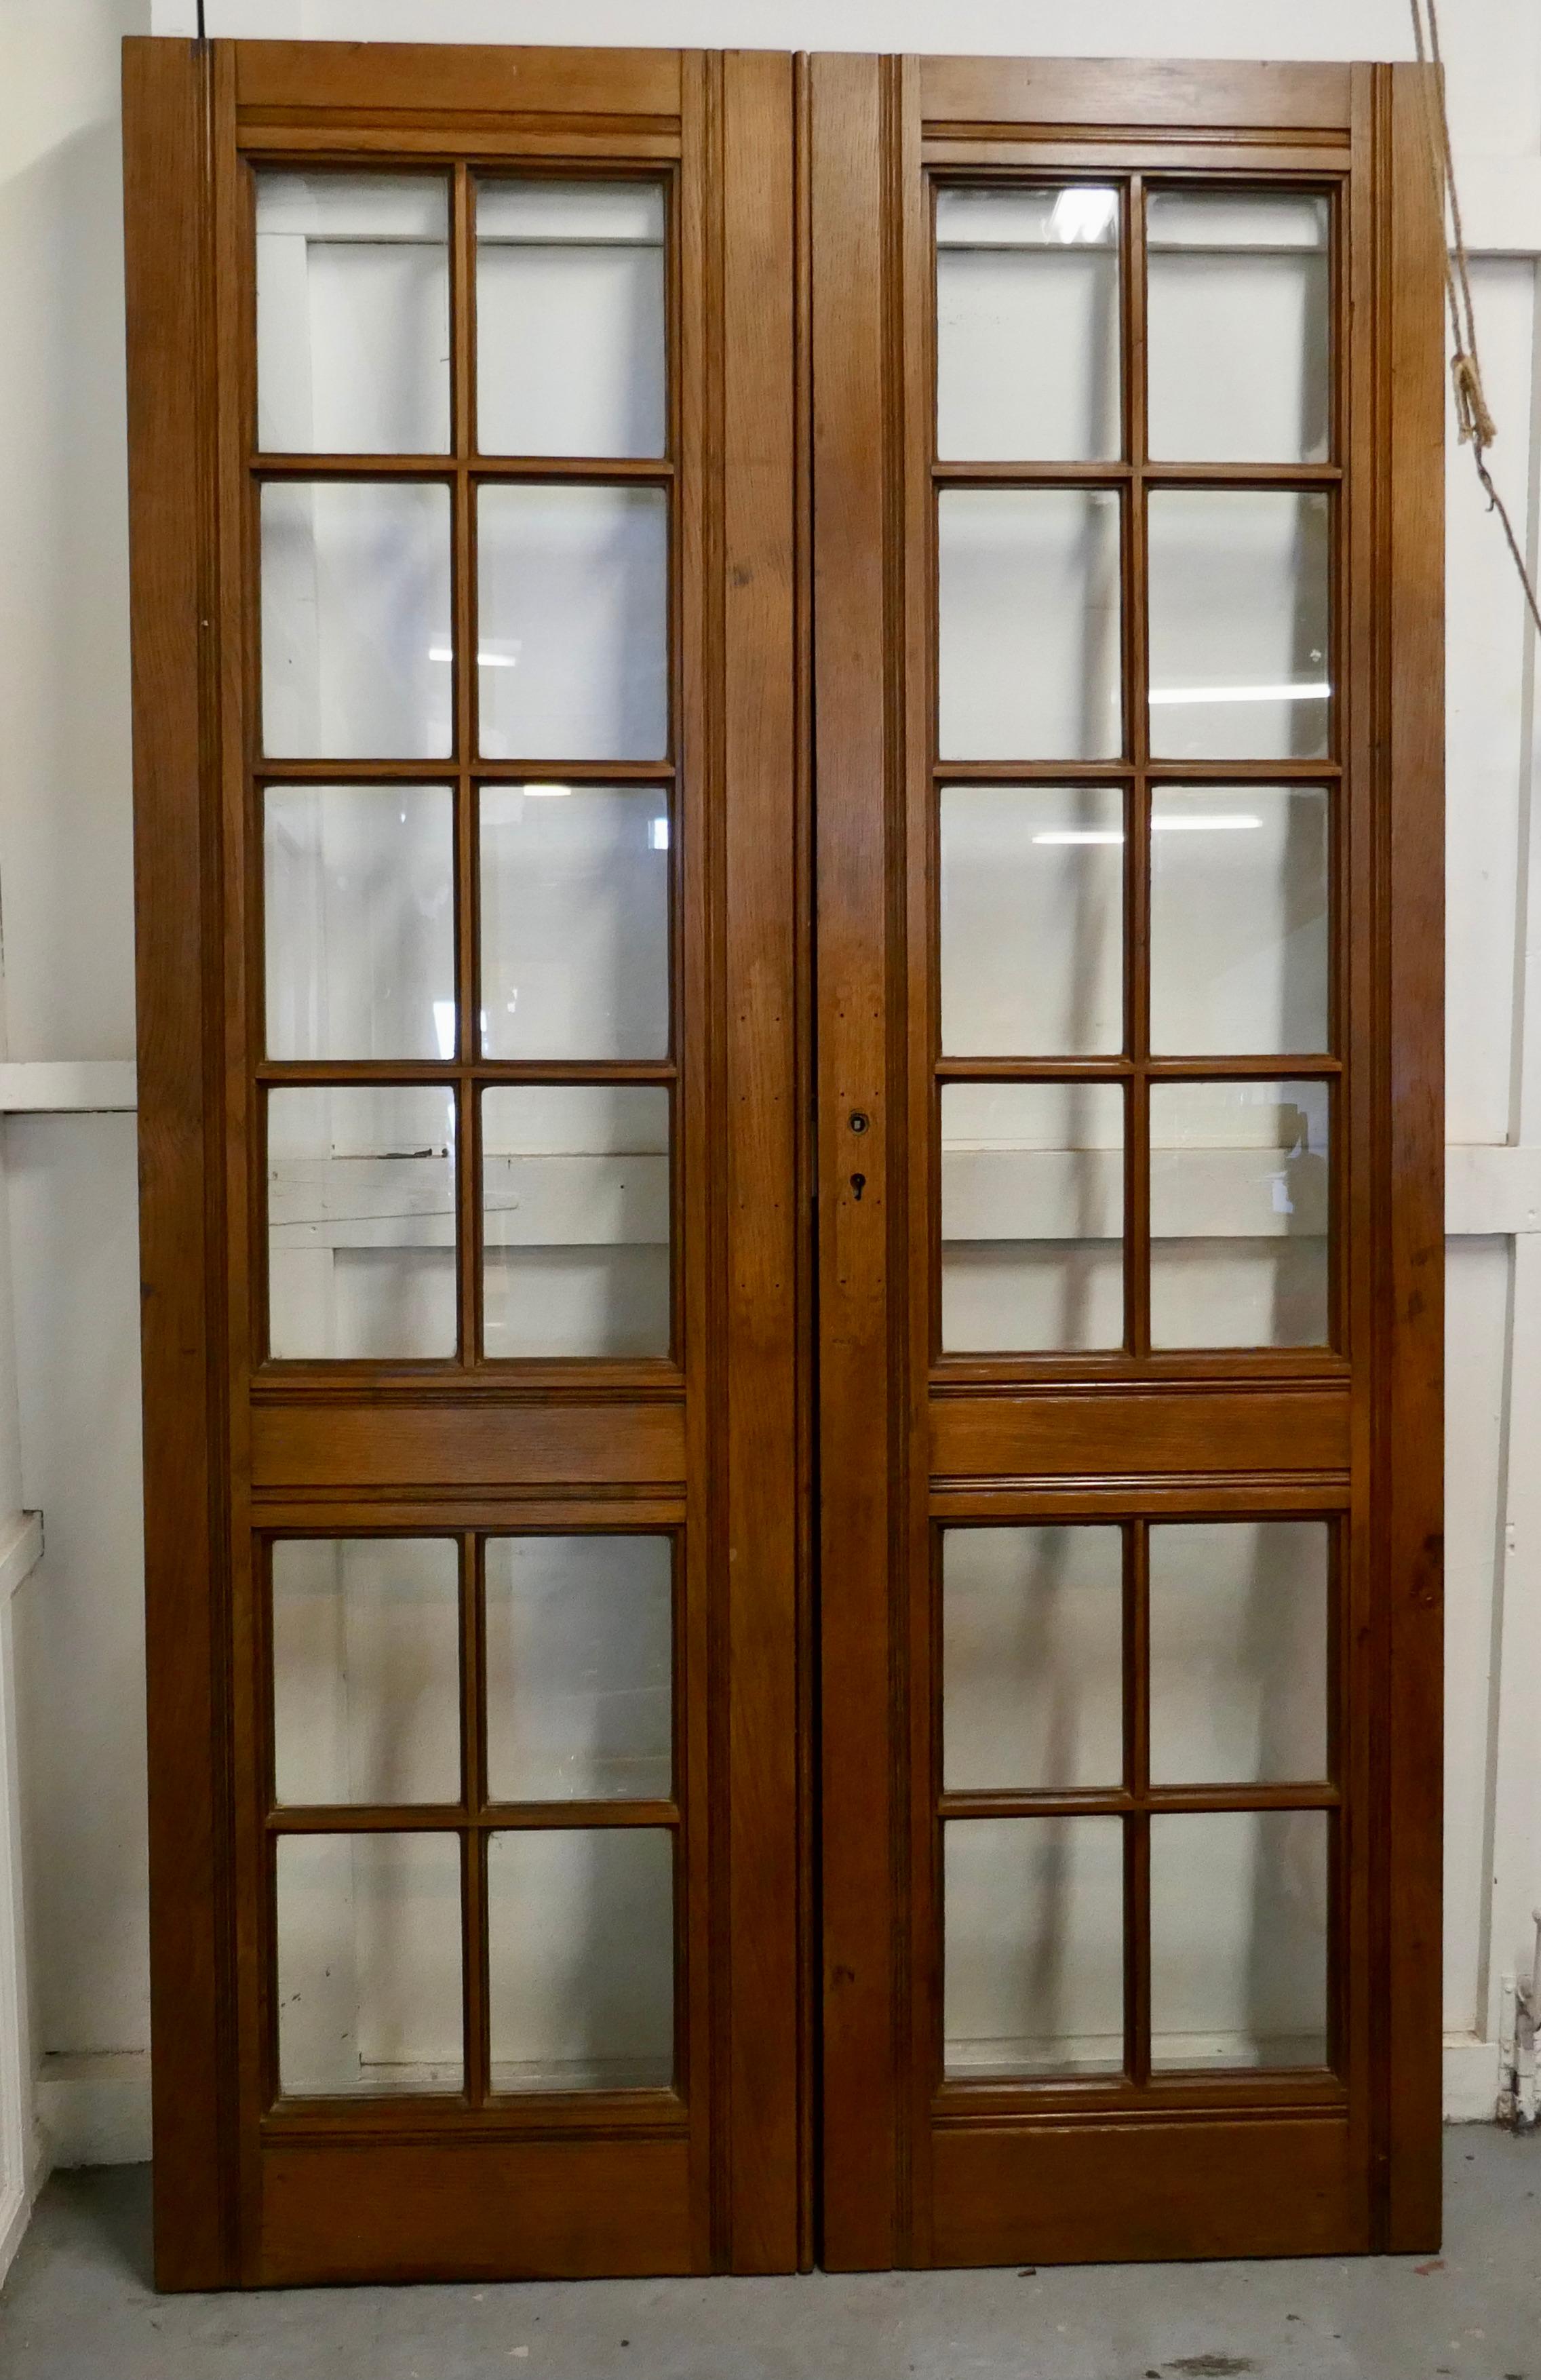 A pair of original 19th century glazed oak double doors

These are a craftsman made pair of deers, they each have 12 panes of glass from top to bottomed made in 2” thick Golden oak, needless to say these are a very heavy pair
They are in good